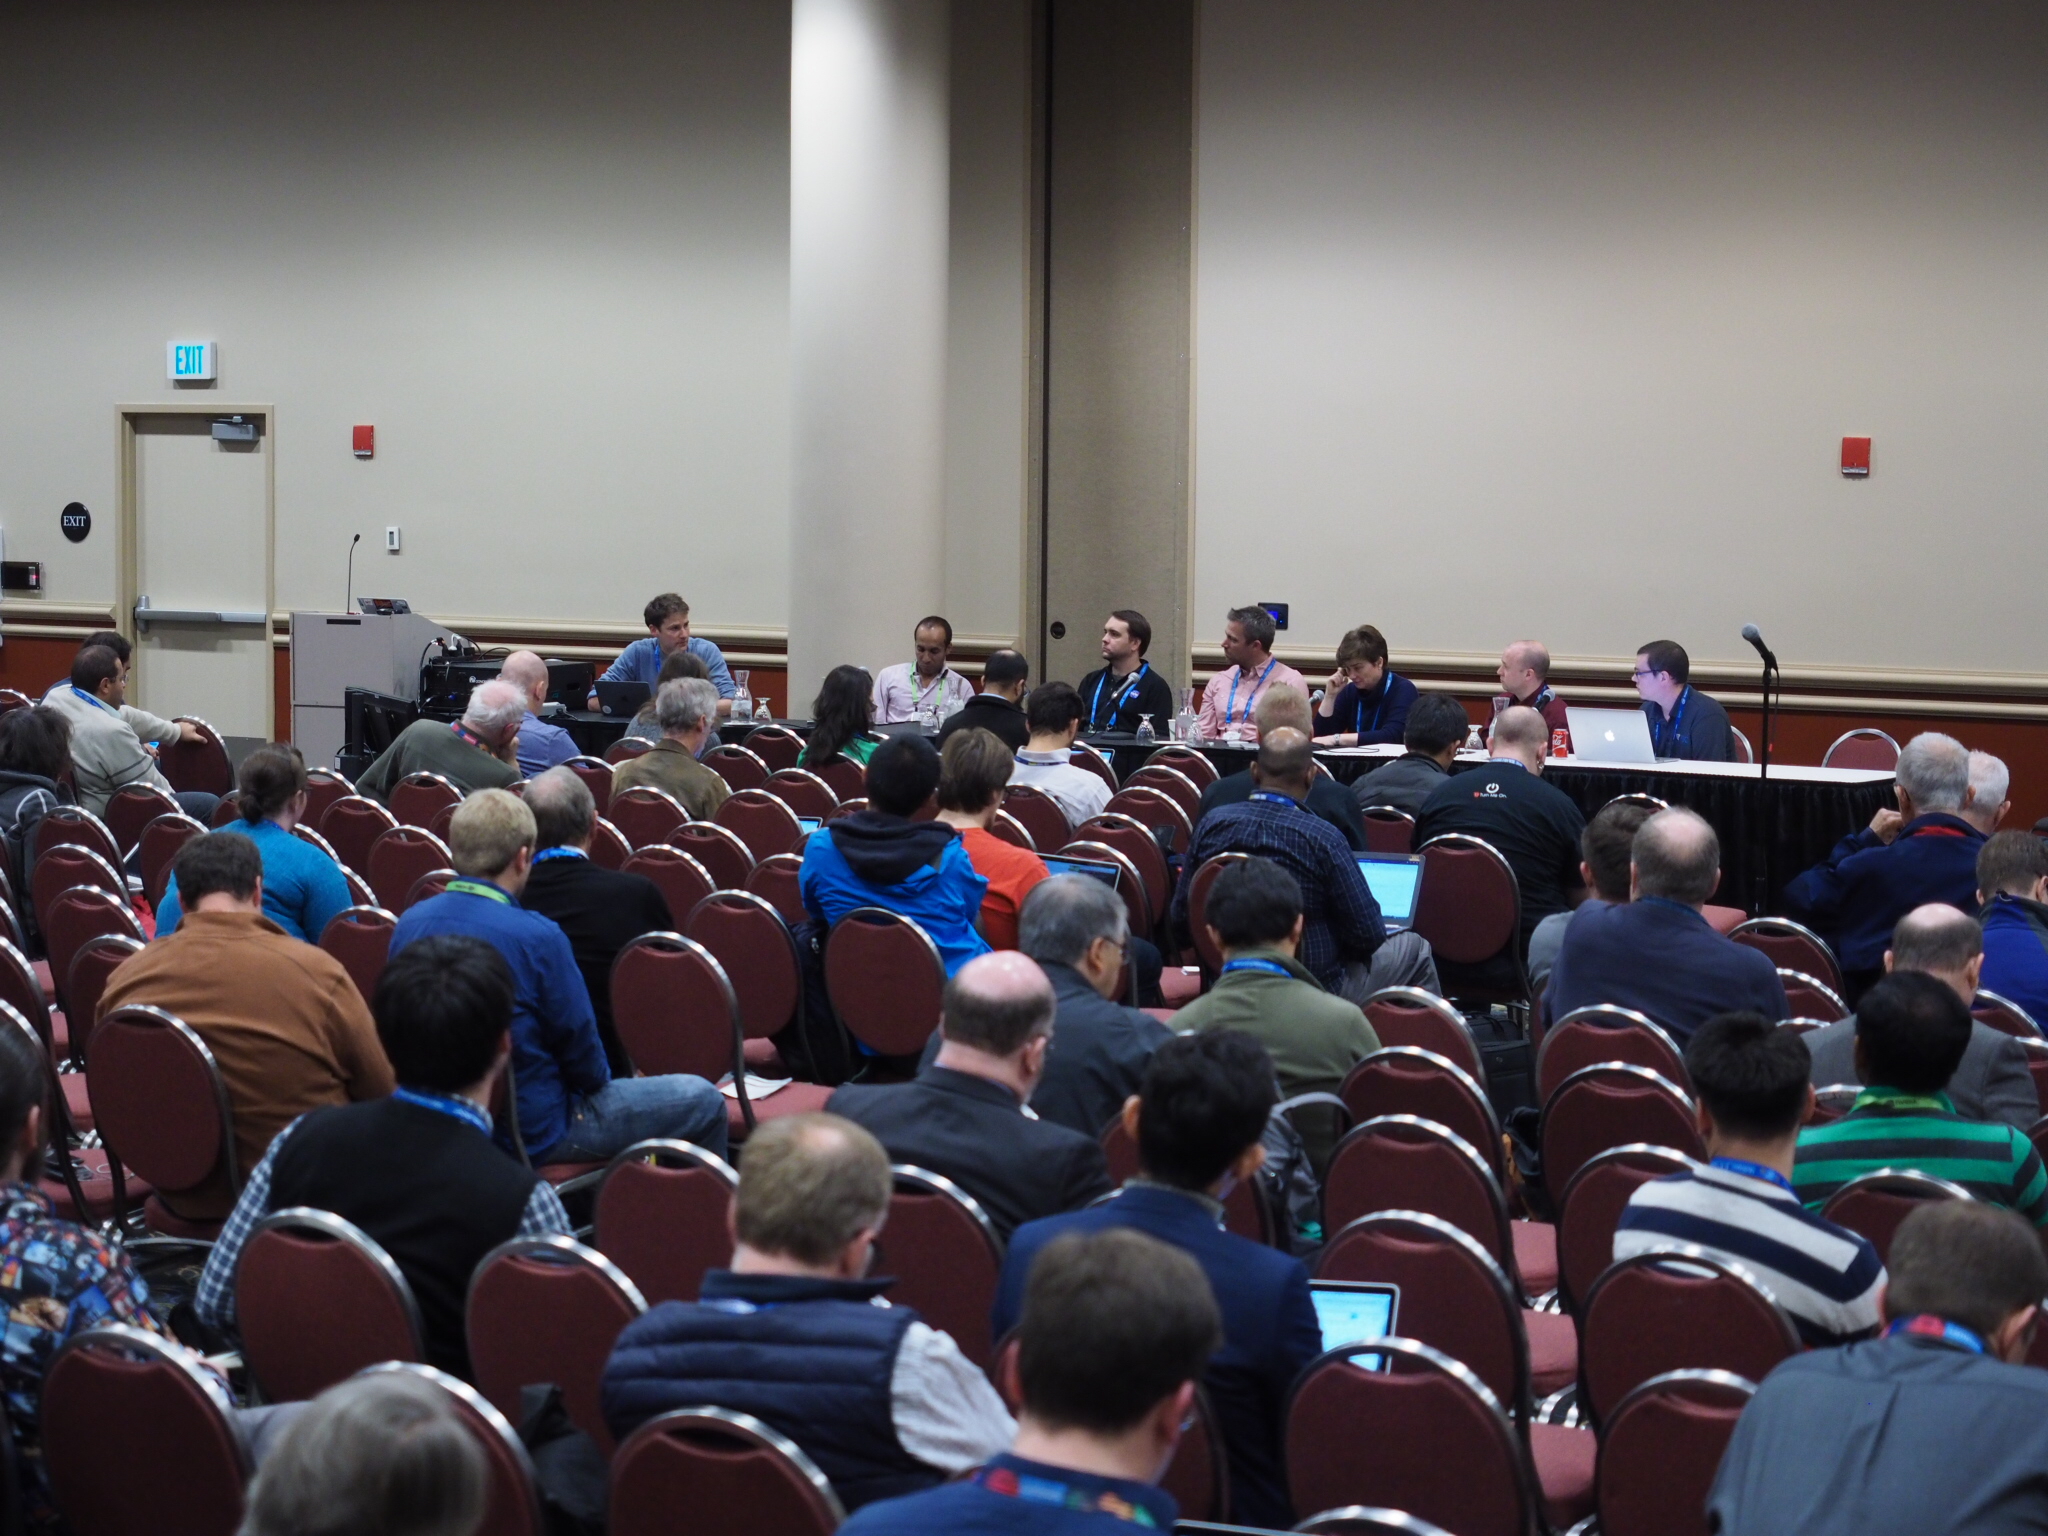 OpenStack HPC panel session